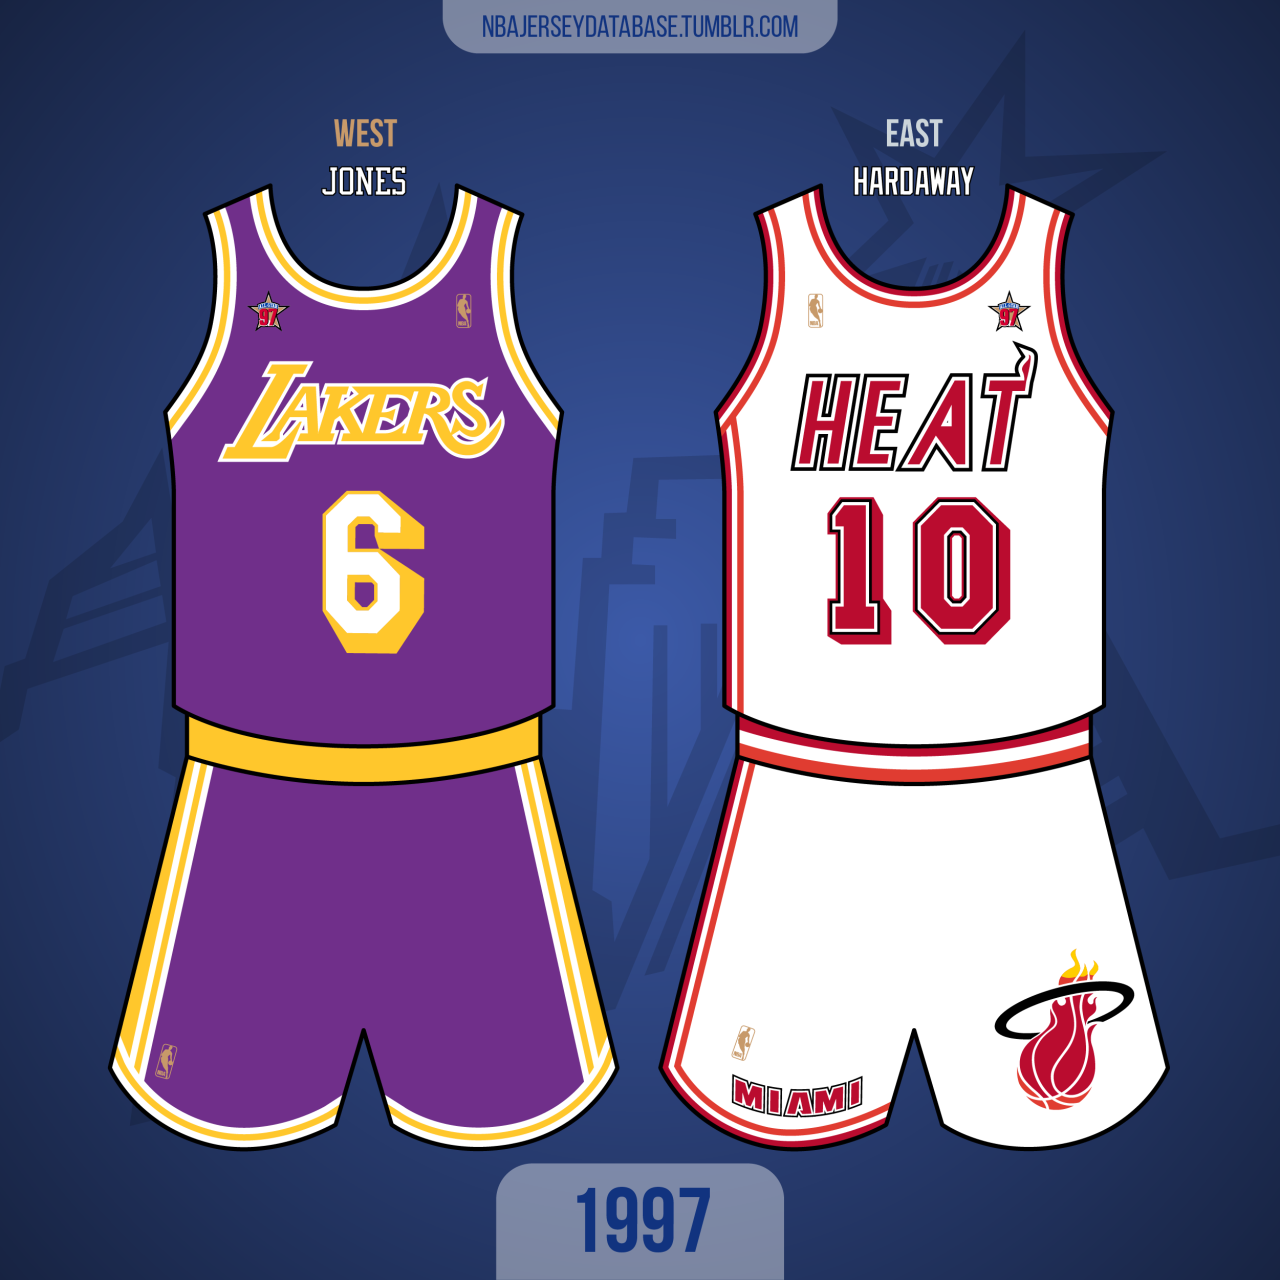 NBA Jersey Database, 1997 NBA All-Star GameGund Arena East 132 - West